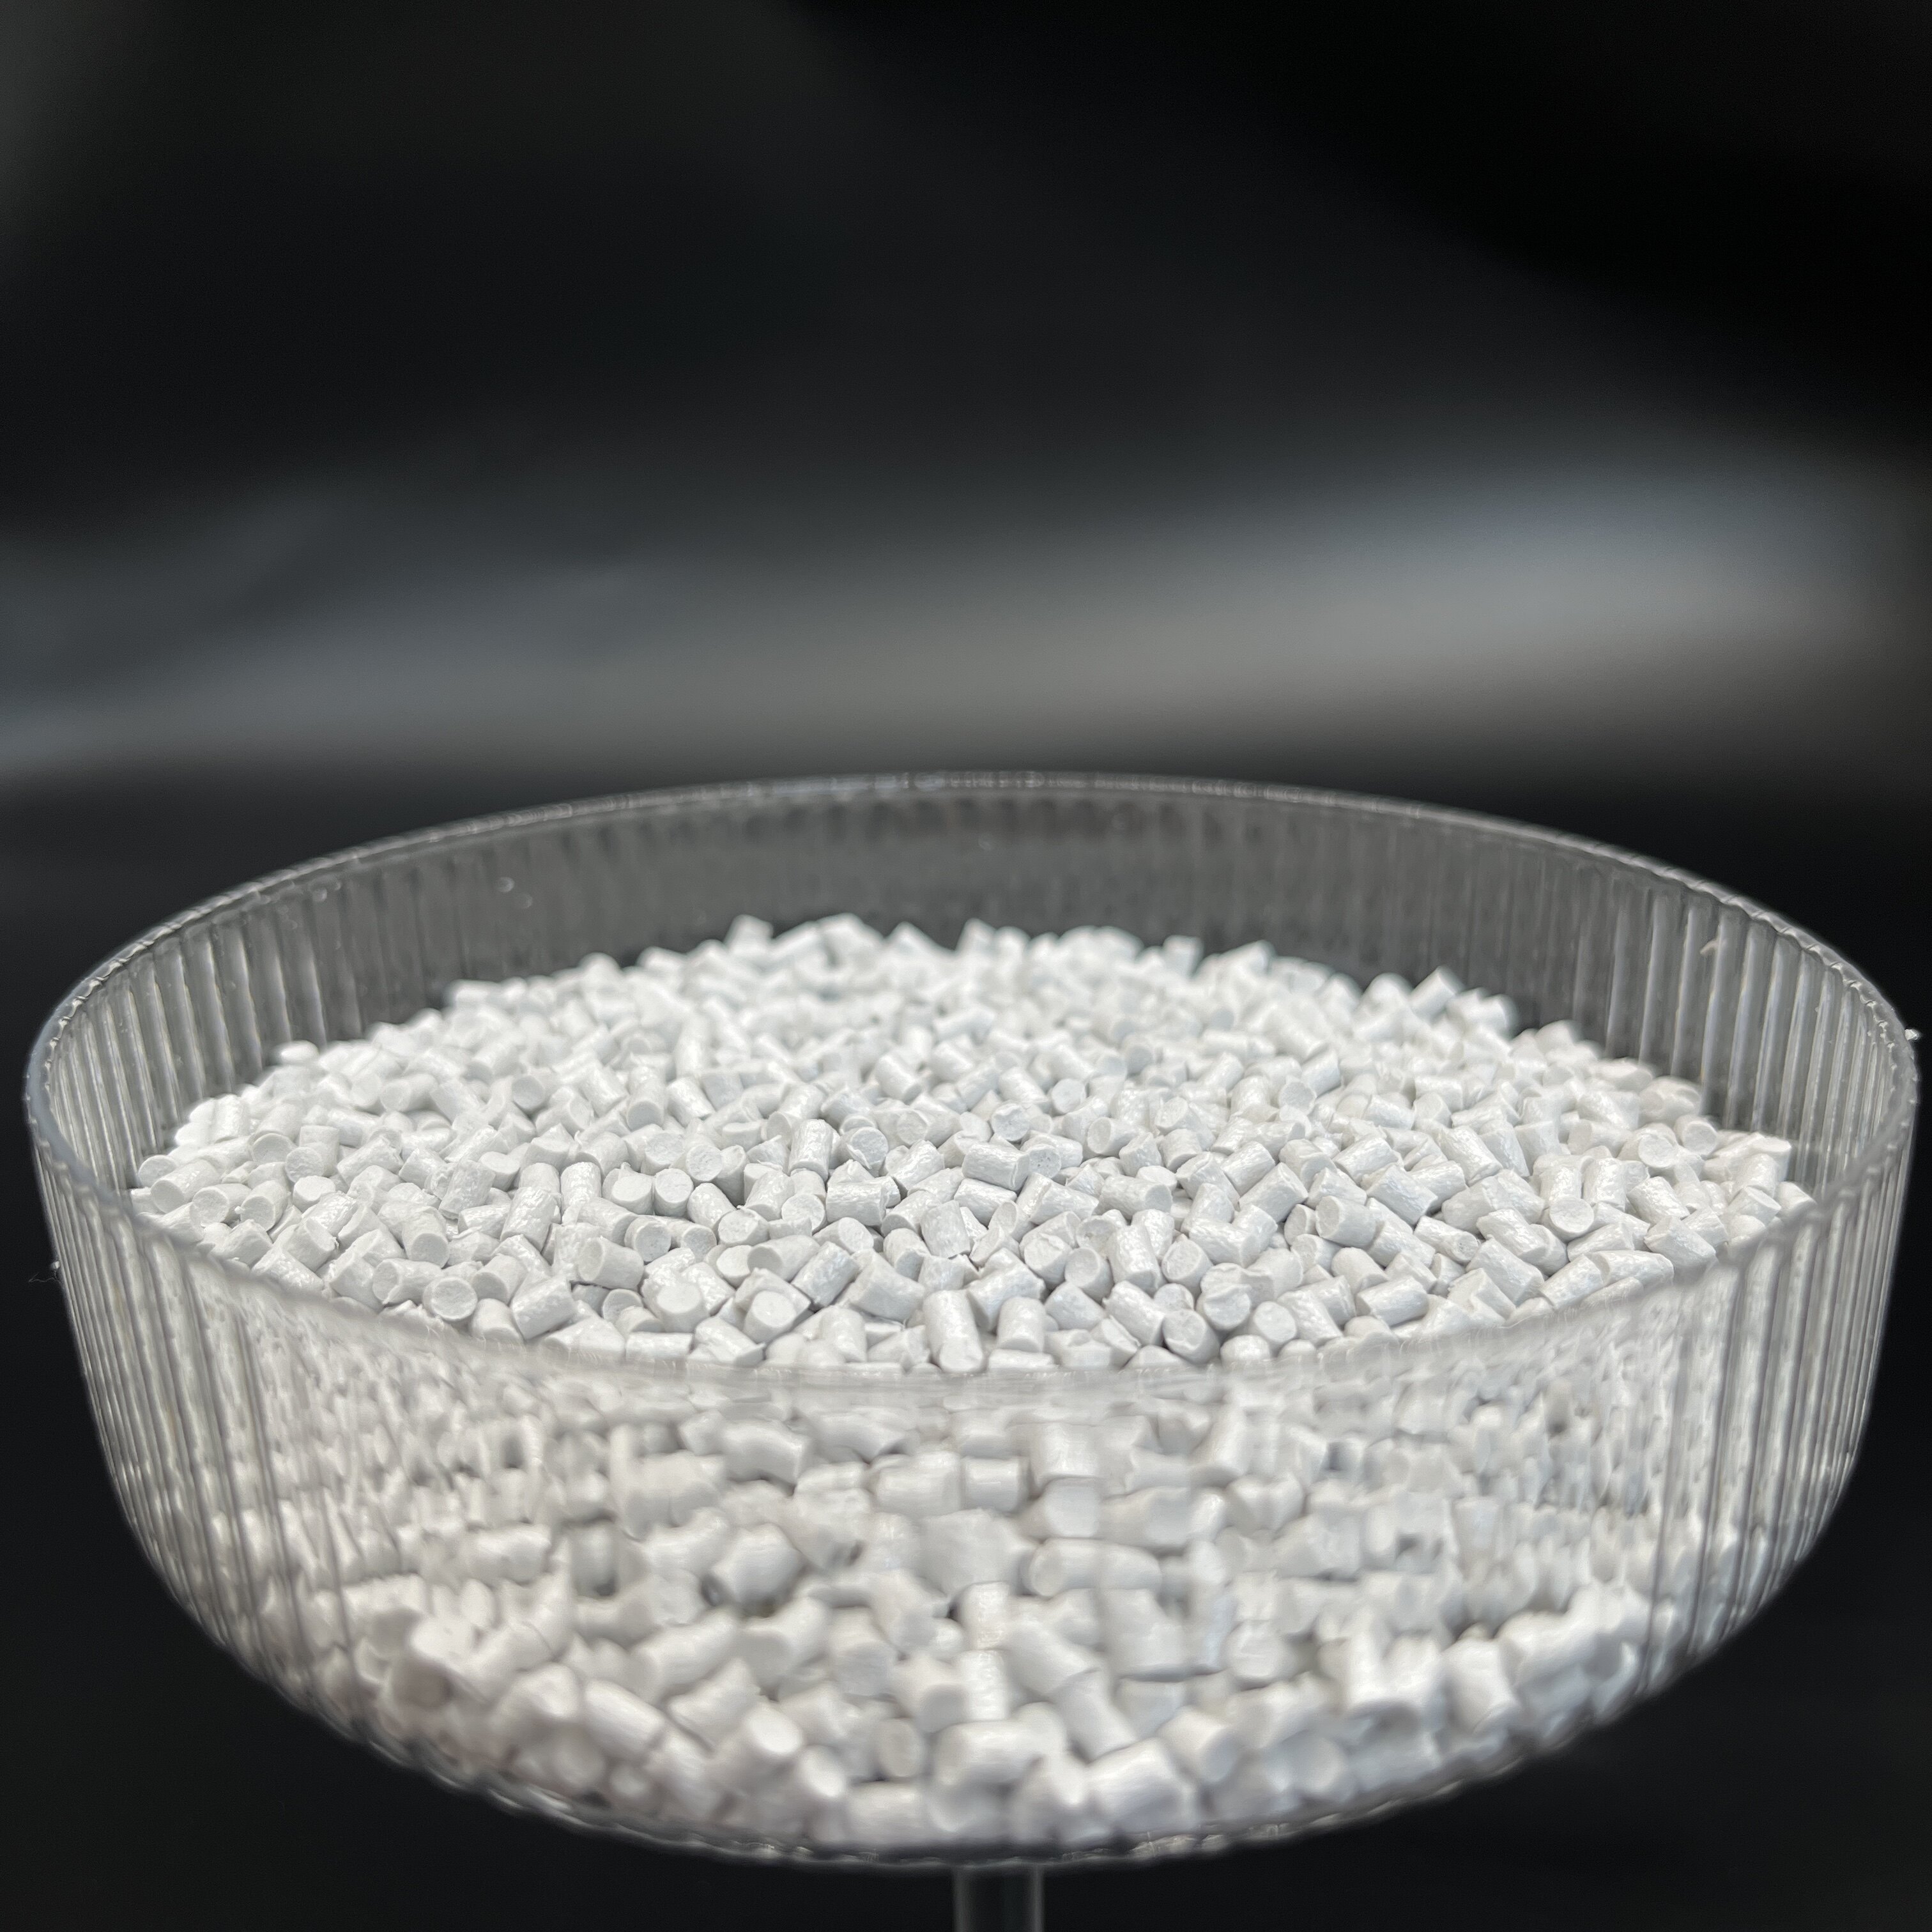 PP Pellets Wholesale: The Ultimate Guide to High-Quality Plastic Raw Materials